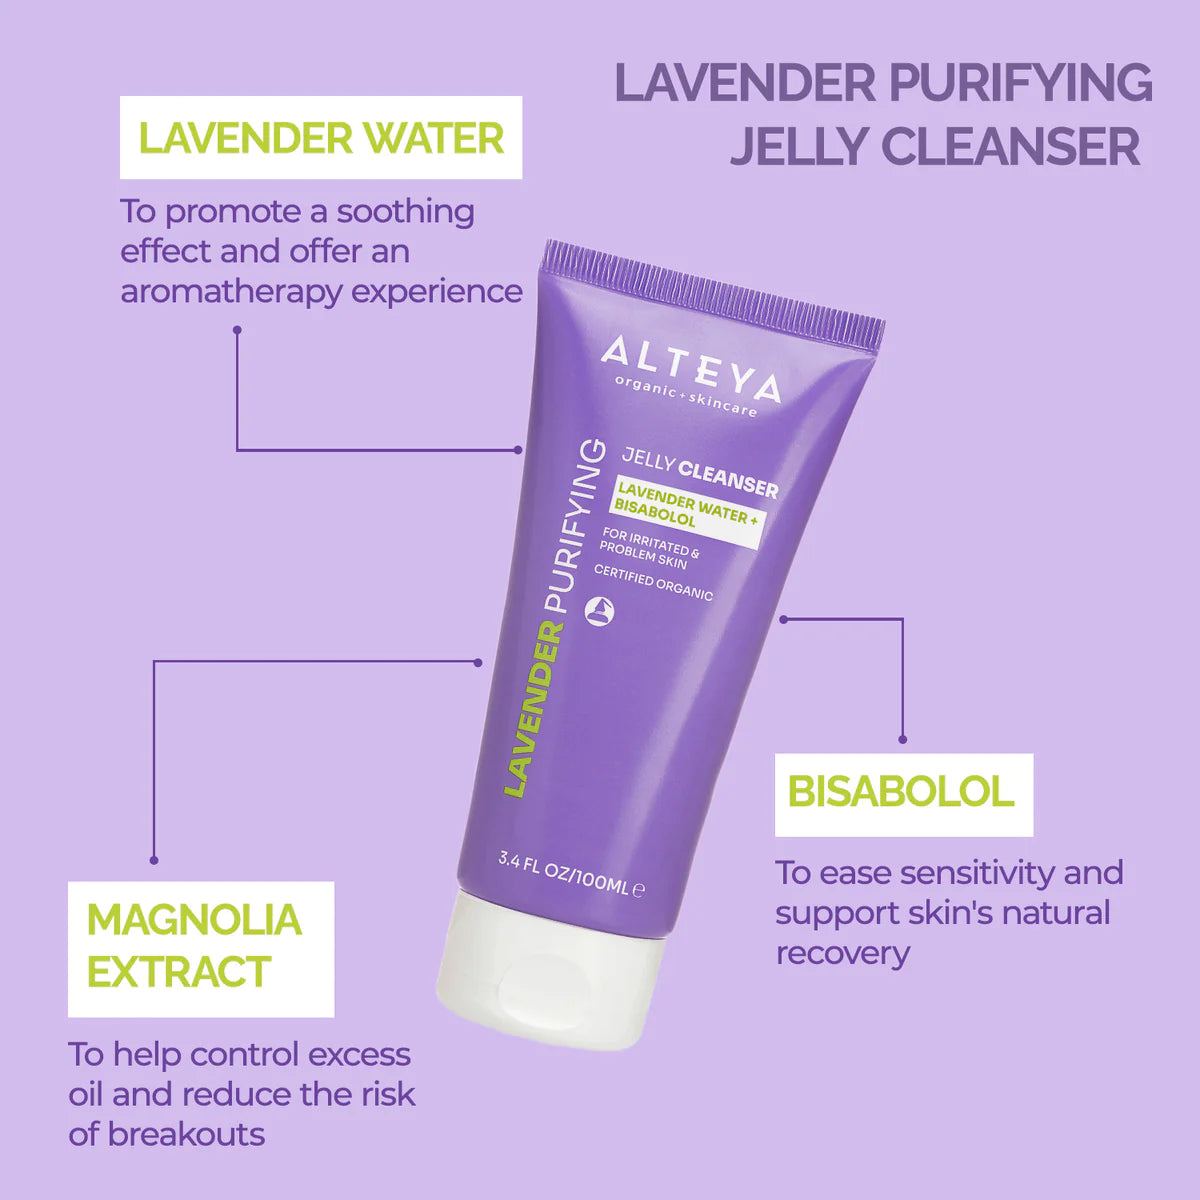 This high-quality Alteya Organics Lavender Purifying Jelly Cleanser is made with organic lavender water and soothing bisabolol, ensuring a refreshing and purifying cleansing experience.